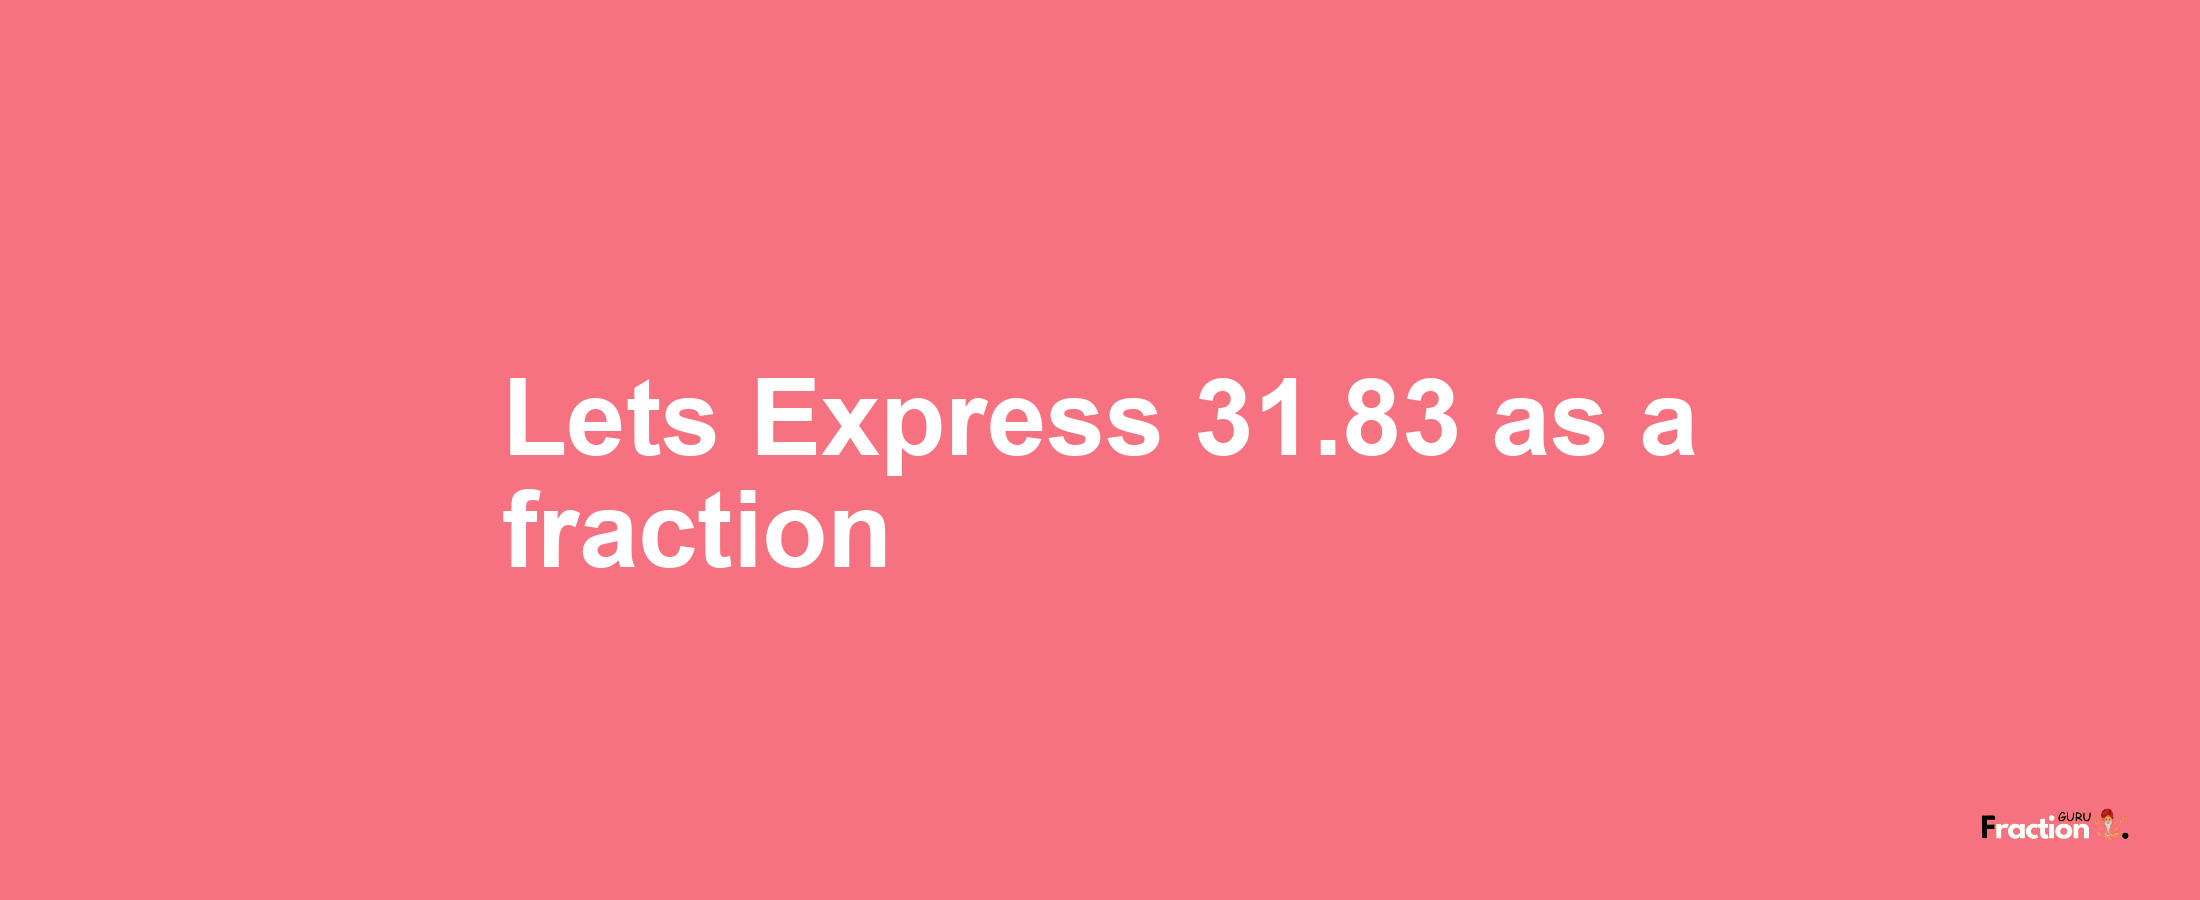 Lets Express 31.83 as afraction